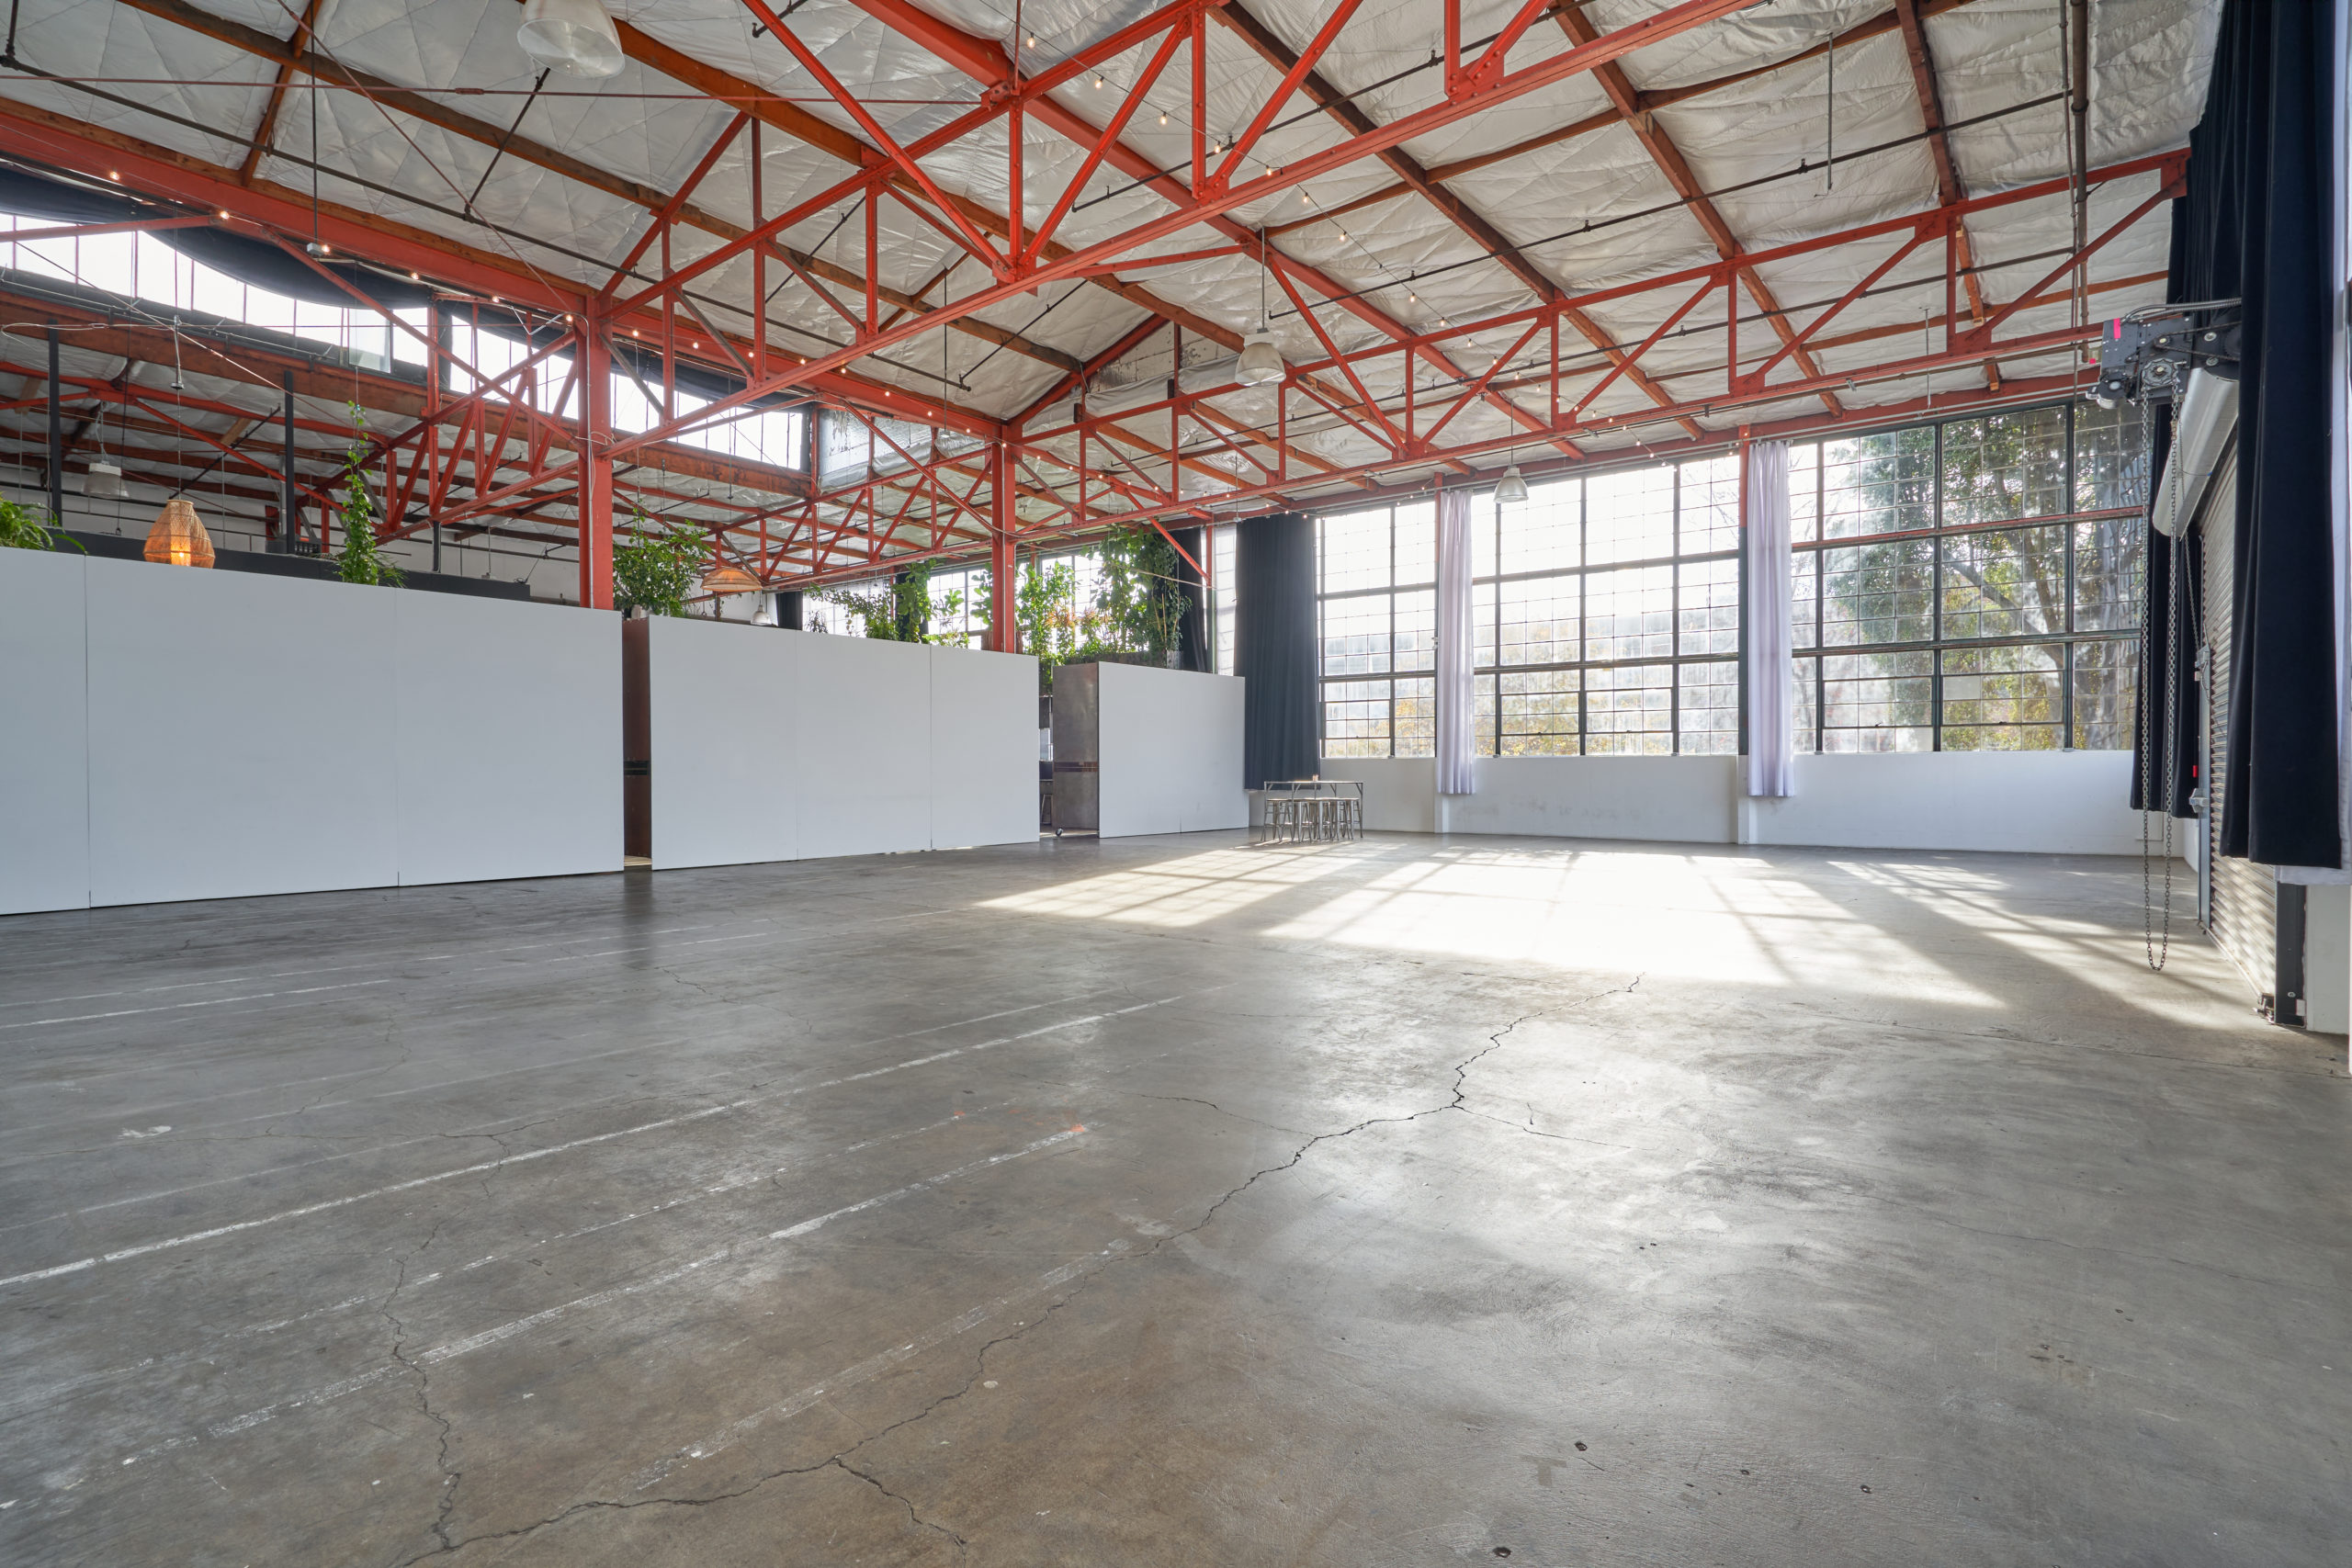 Expansive view of Studio 5 with 3,700 square feet of space, a large wall of windows, and orange, industrial ceiling beams that make it a spacious multiple set studio rental Berkeley has to offer.